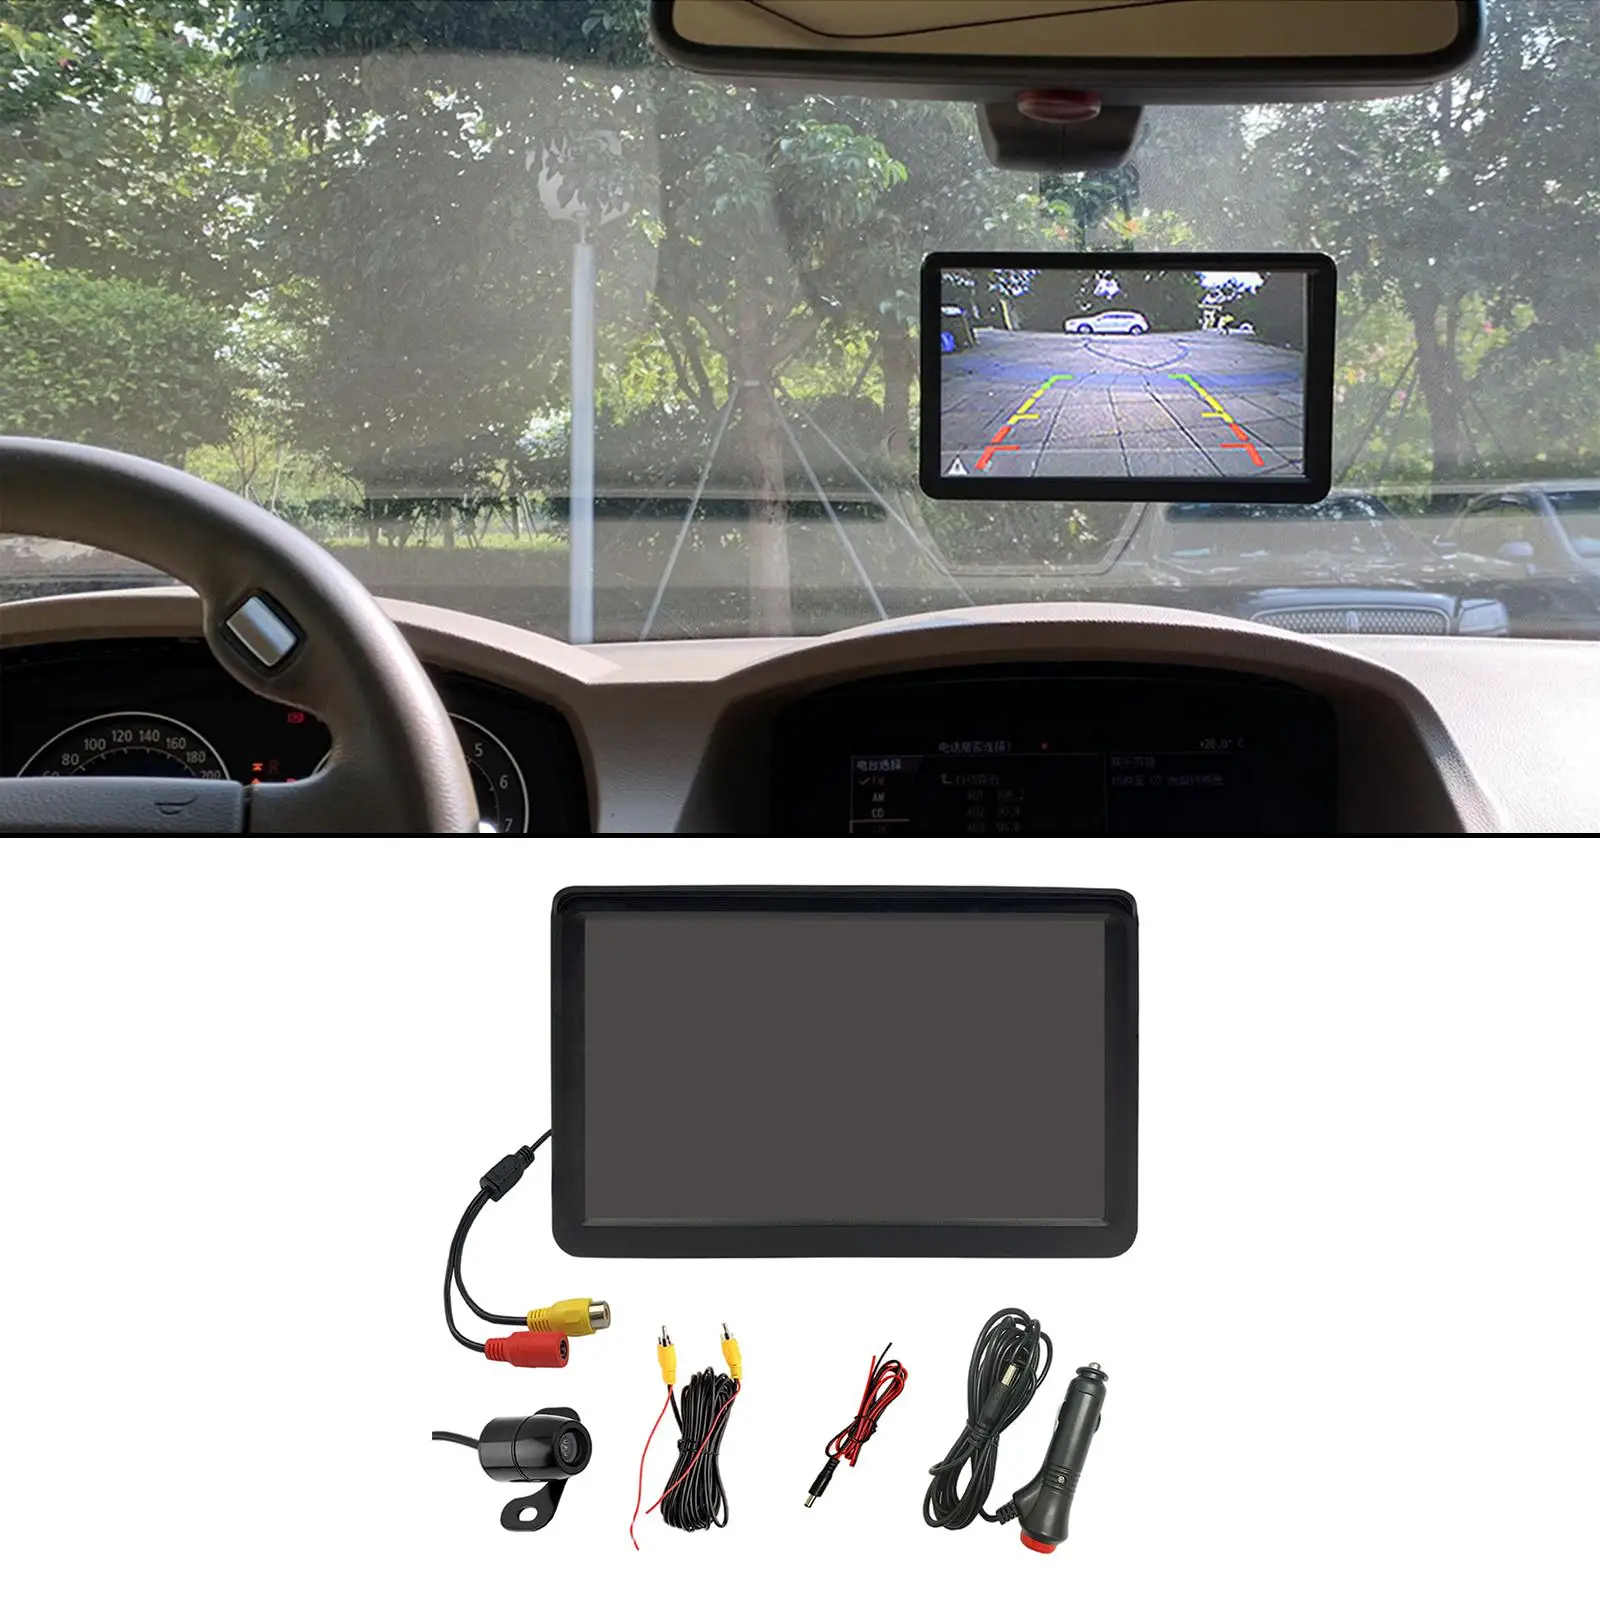  Car Monitor LCD 7 inch 170 Angle Waterproof Scale Lines 12V  for Parking Vehicles Camera and Monitor Kit